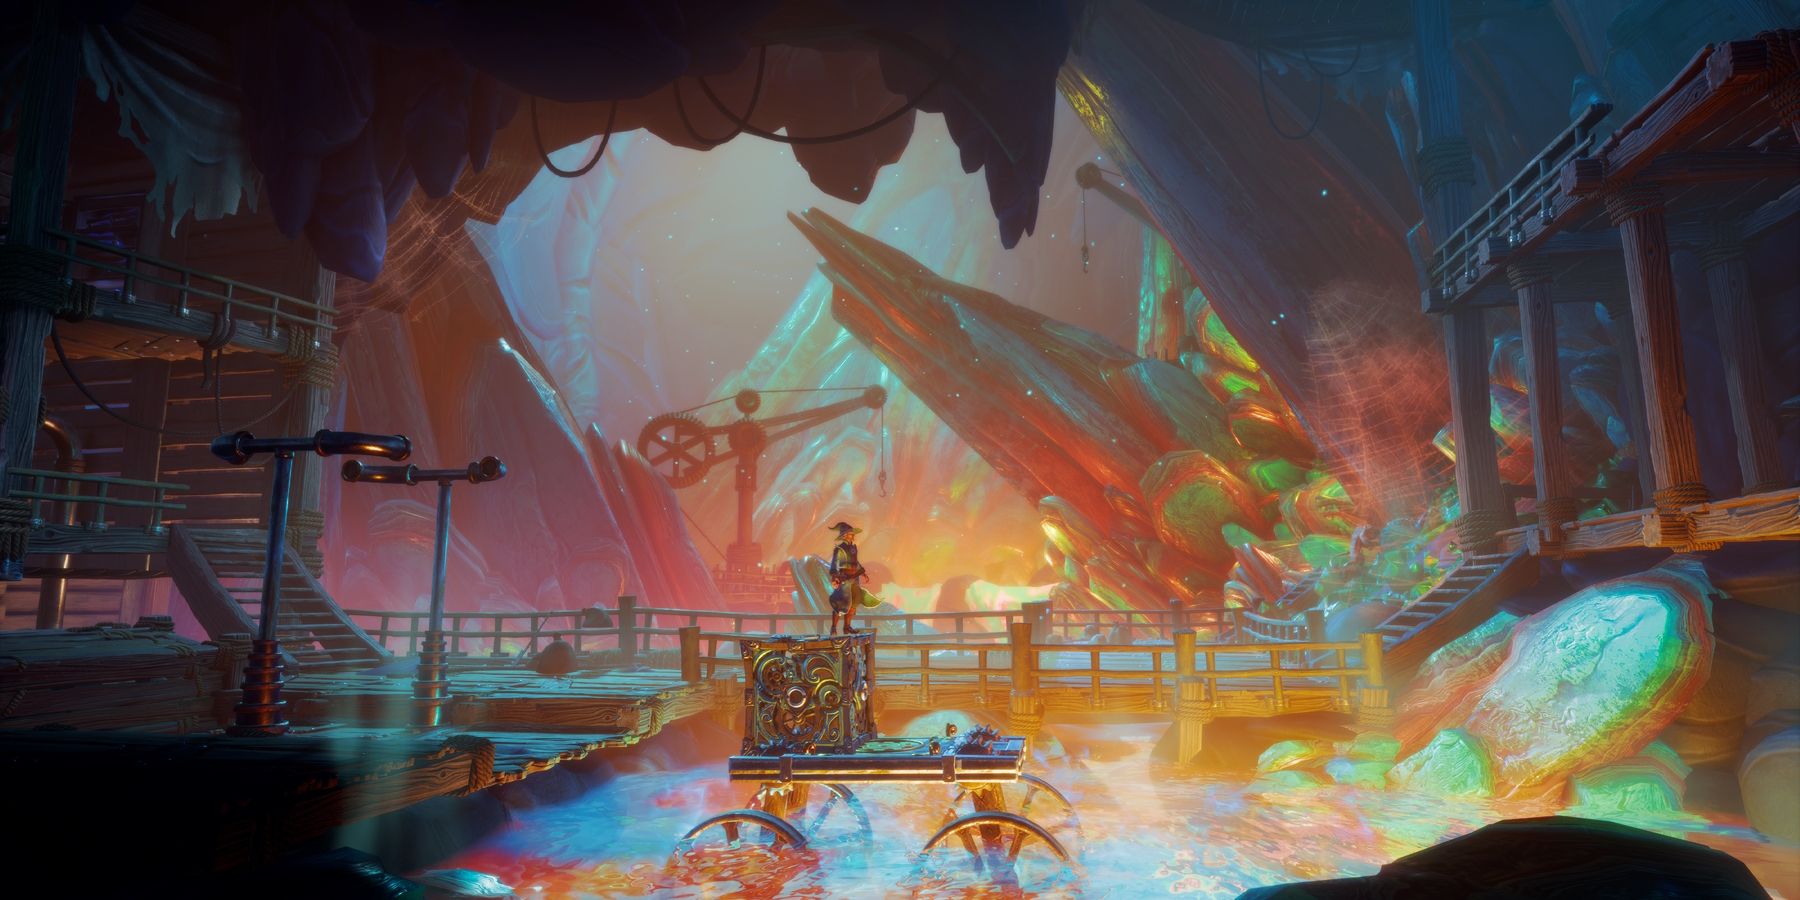 for apple instal Trine 5: A Clockwork Conspiracy